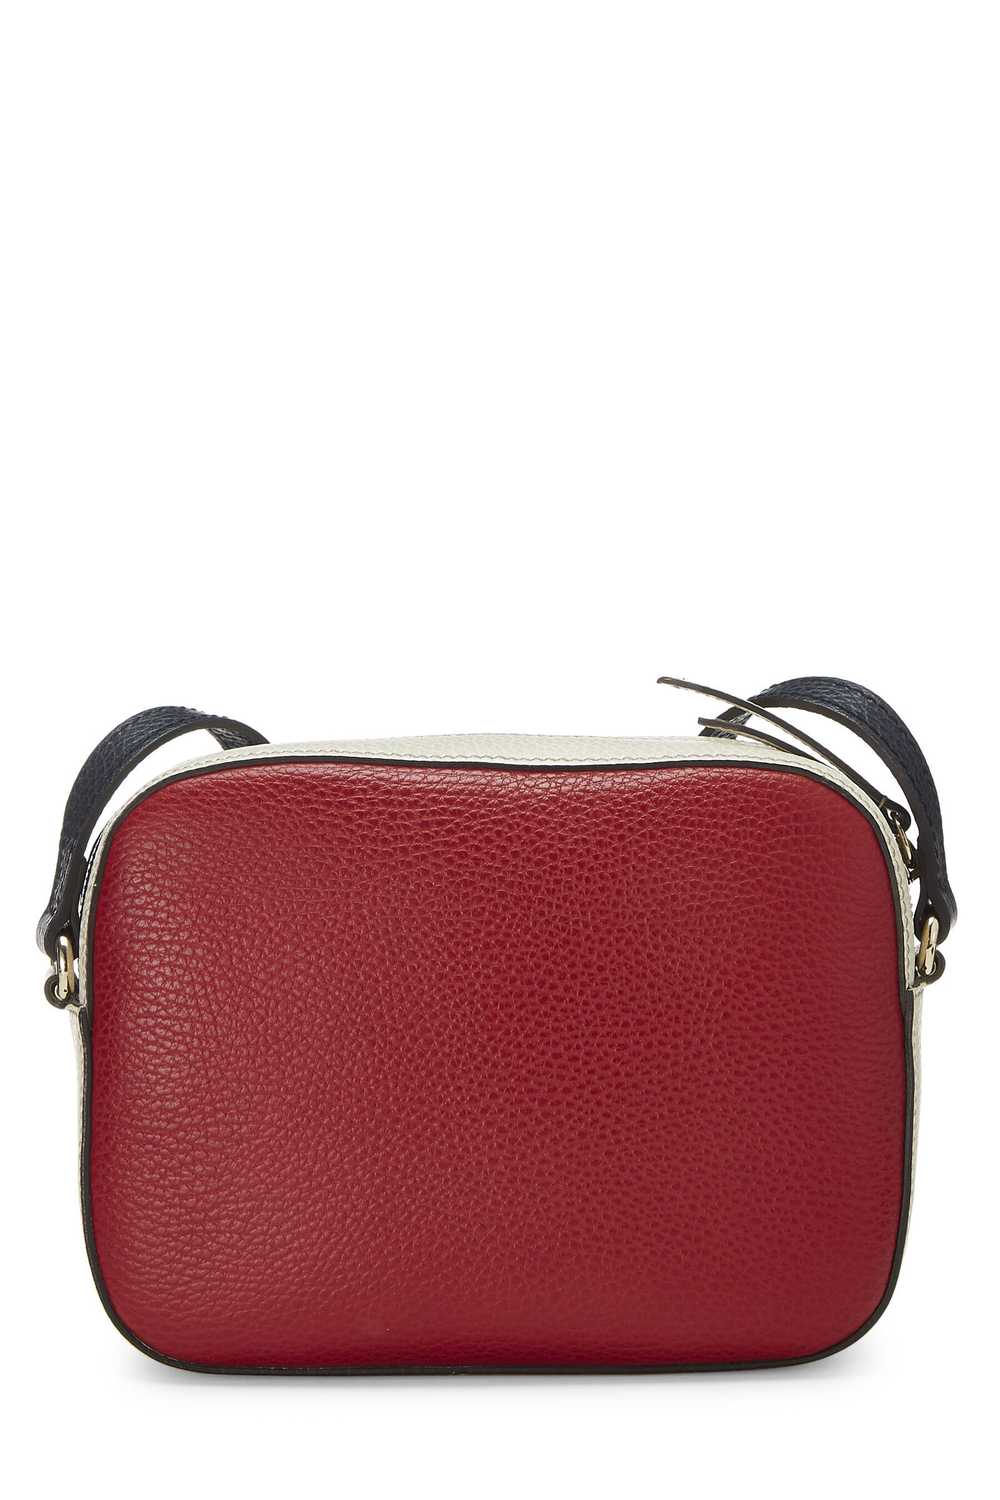 Red Grained Leather Soho Disco - image 7